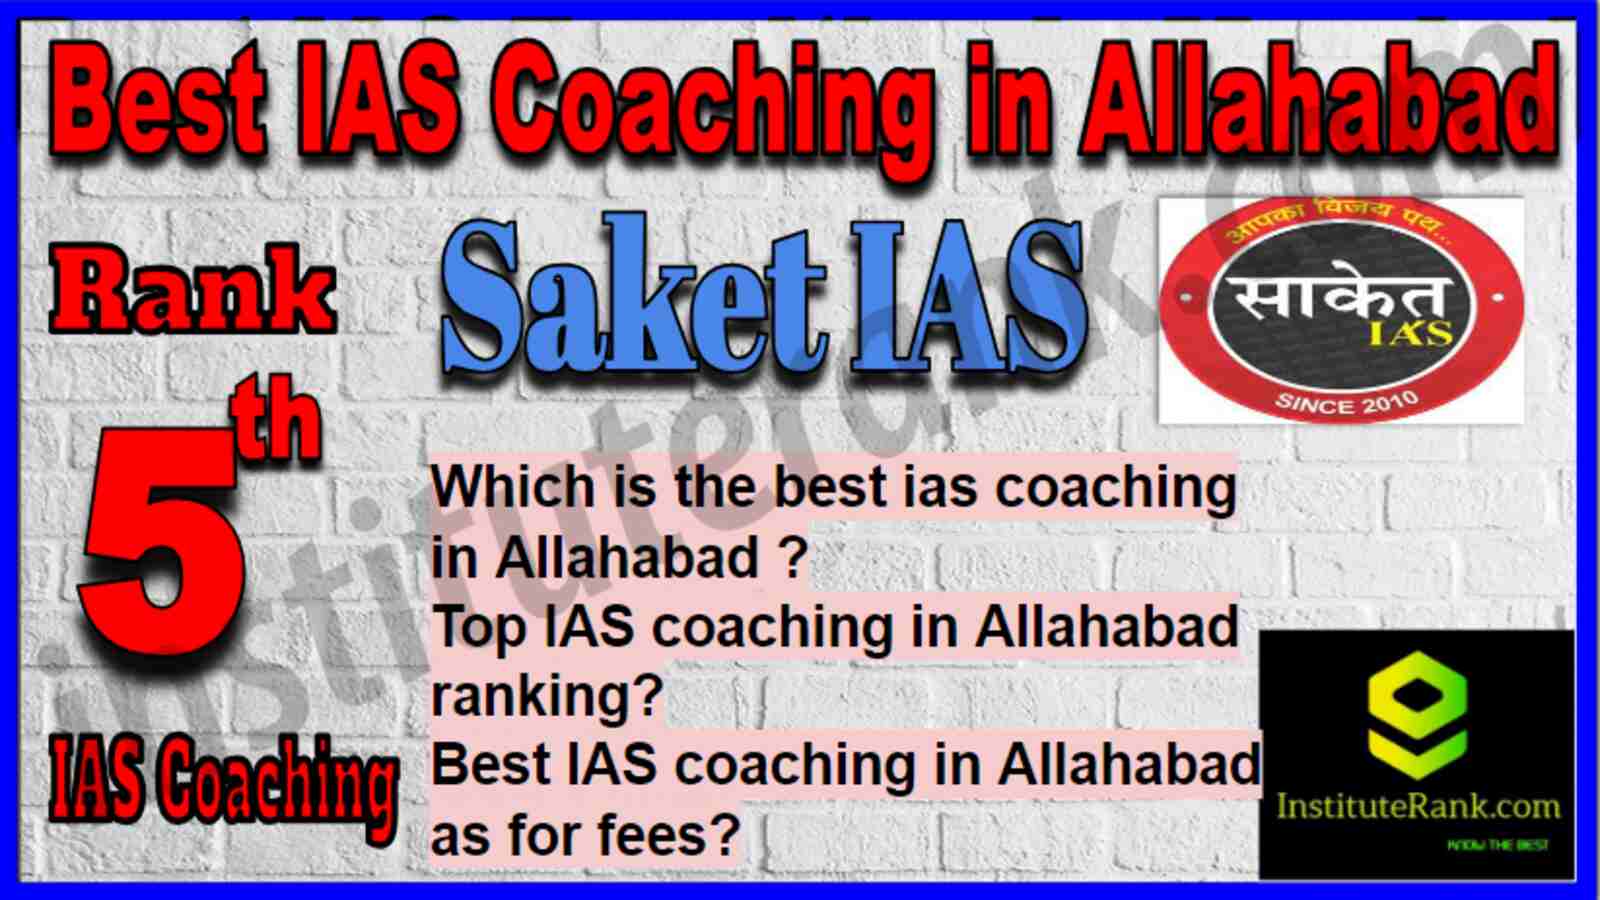 Rank 5 Best IAS Coaching in Allahabad